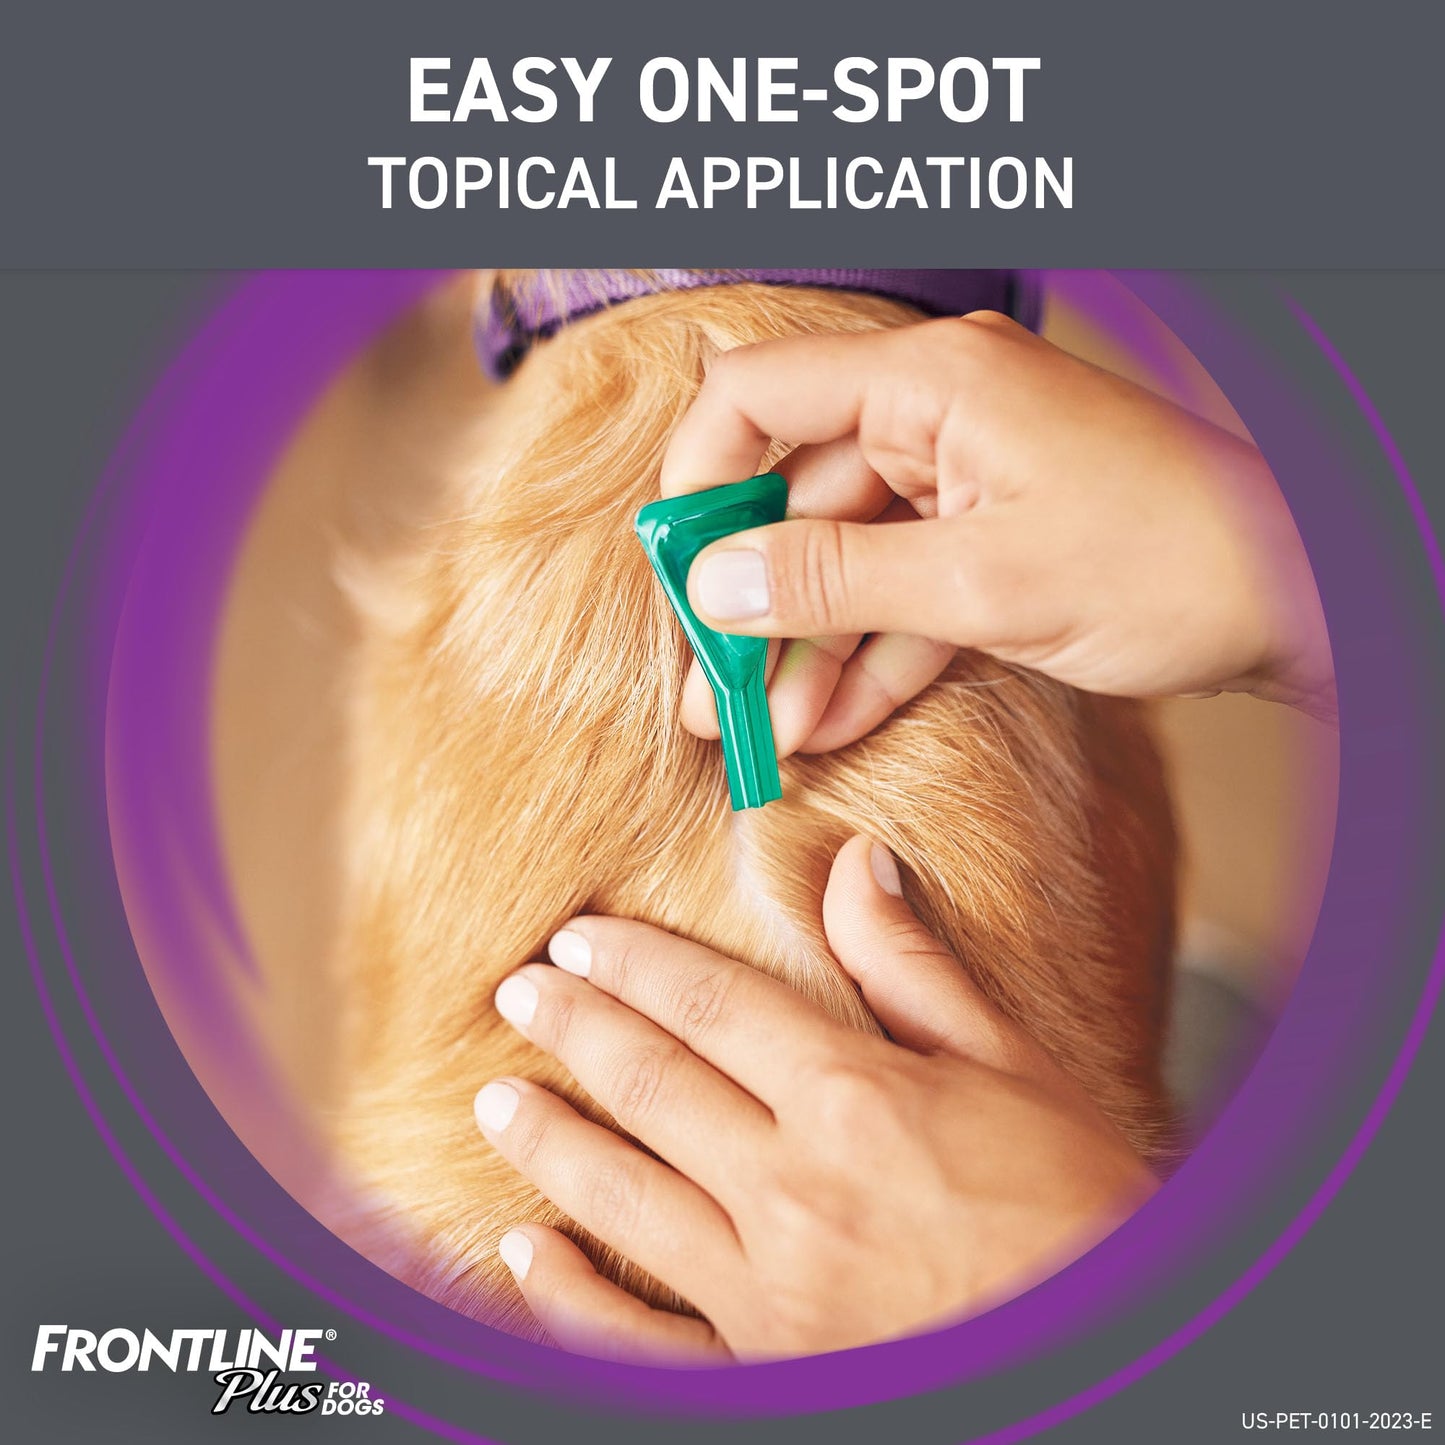 FRONTLINE Plus Flea and Tick Treatment for Large Dogs Up to 45 to 88 lbs., 3 Treatments